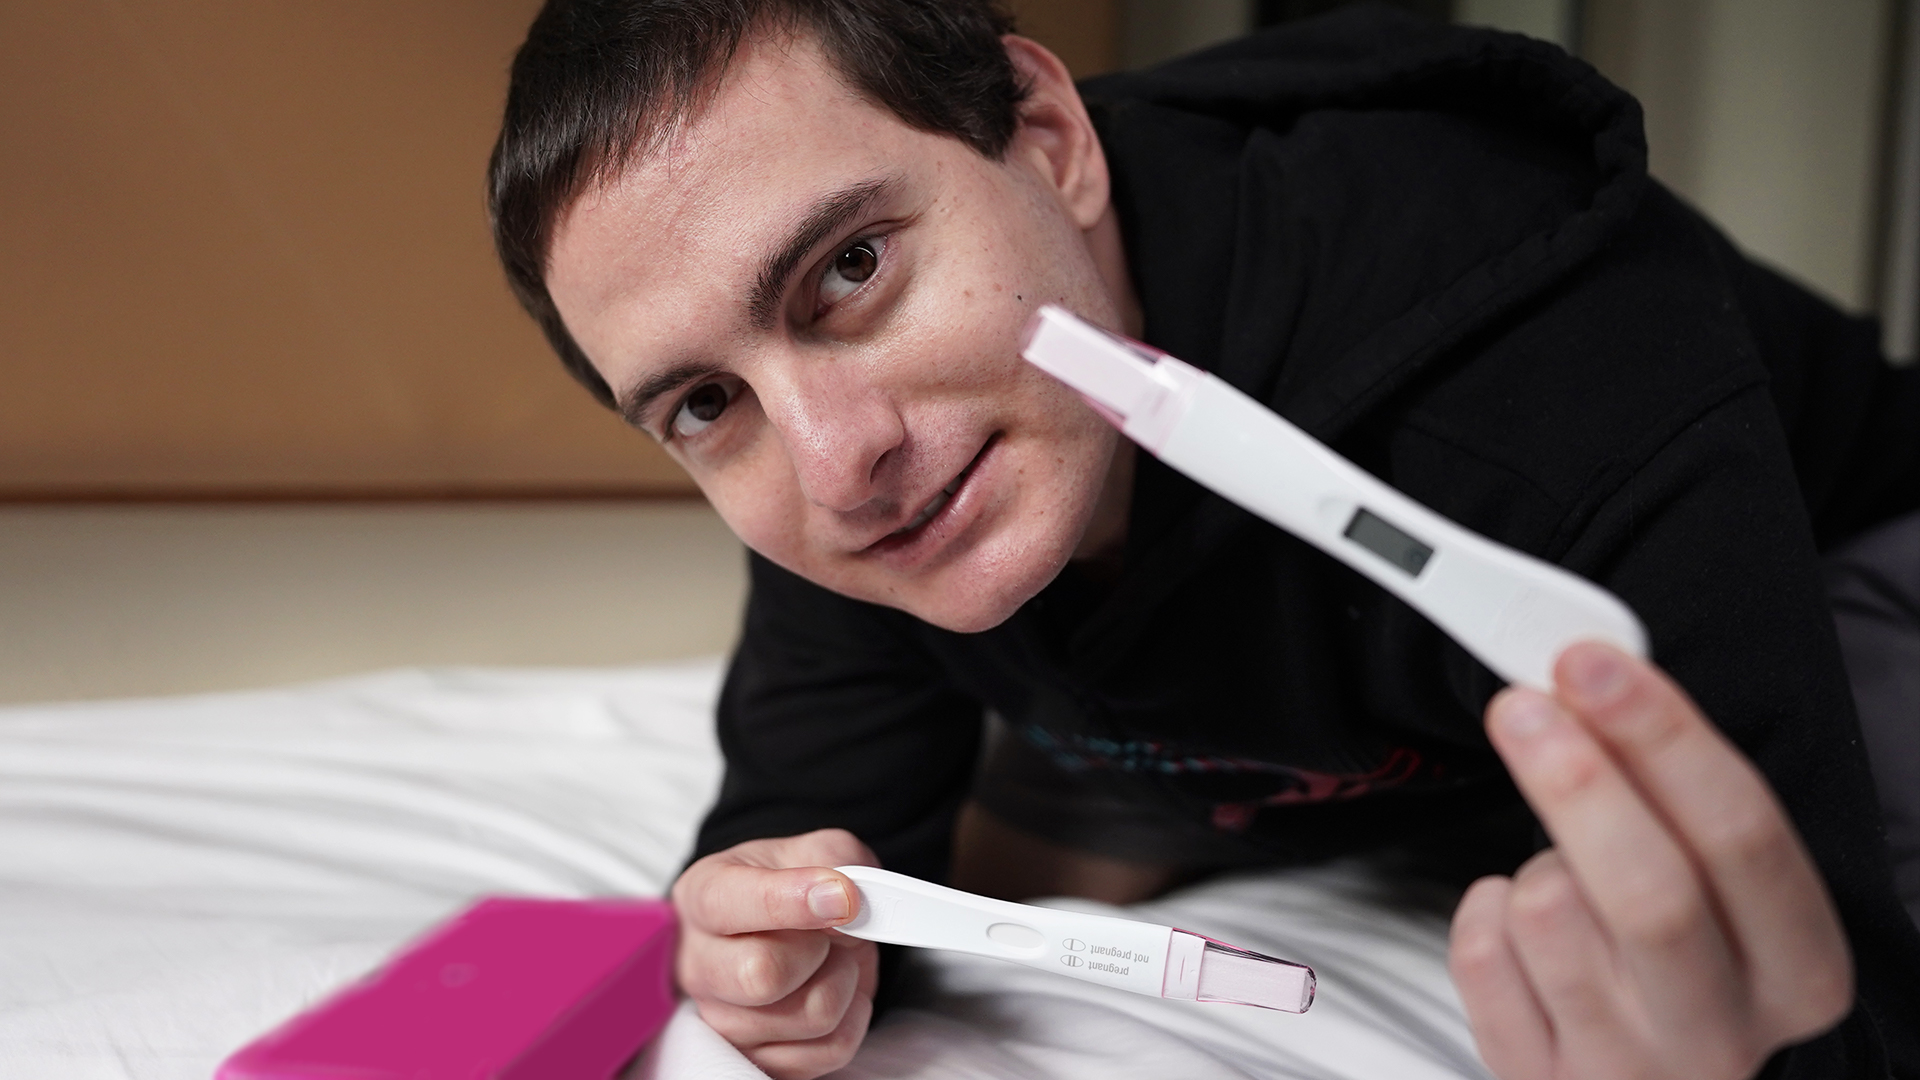 36 Kids and Counting The DIY Sperm Donor image